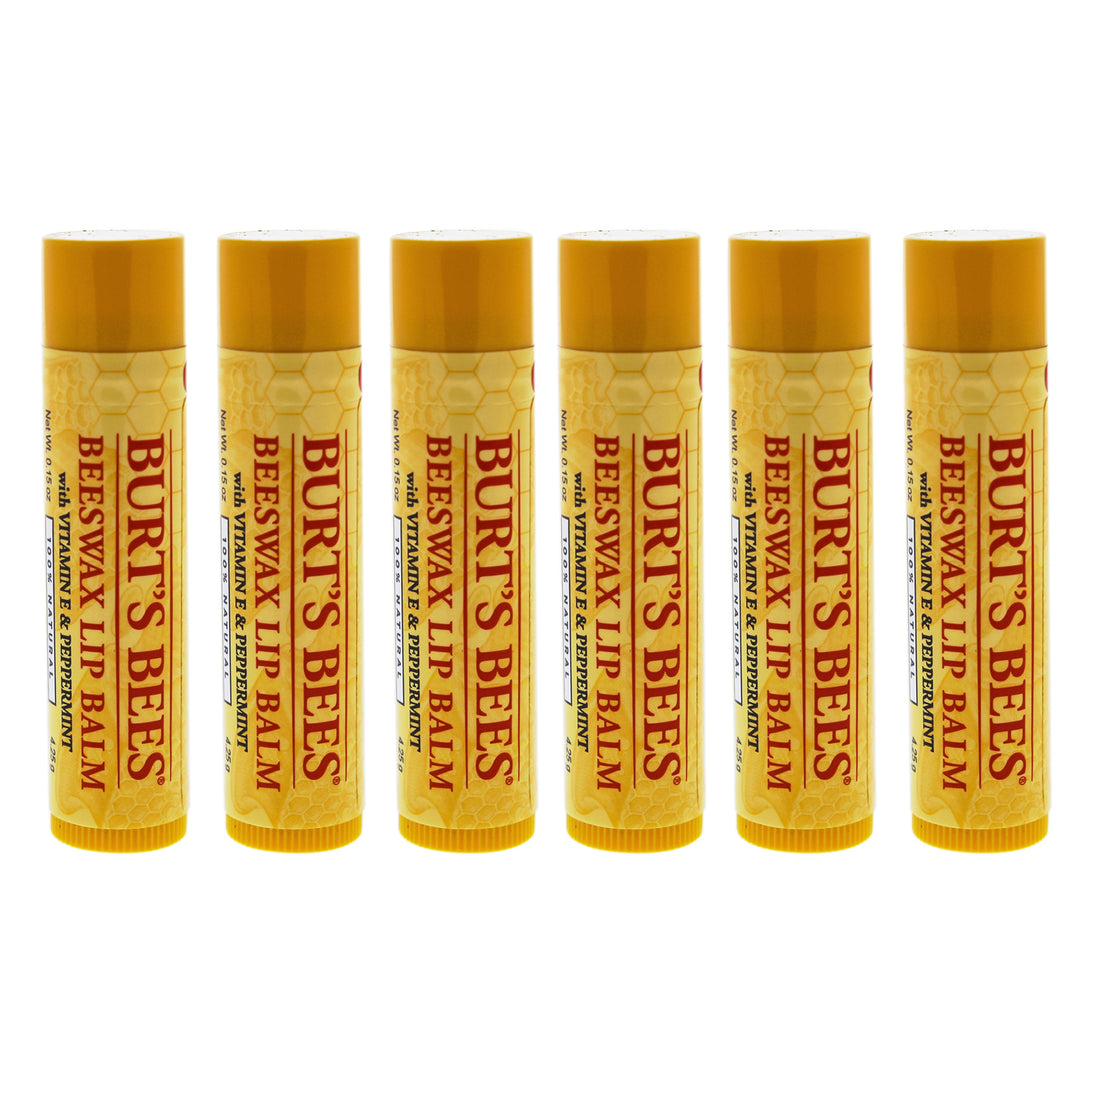 Beeswax Lip Balm With Vitamin E Peppermint by Burts Bees for Unisex - 0.15 oz Lip Balm - Pack of 6